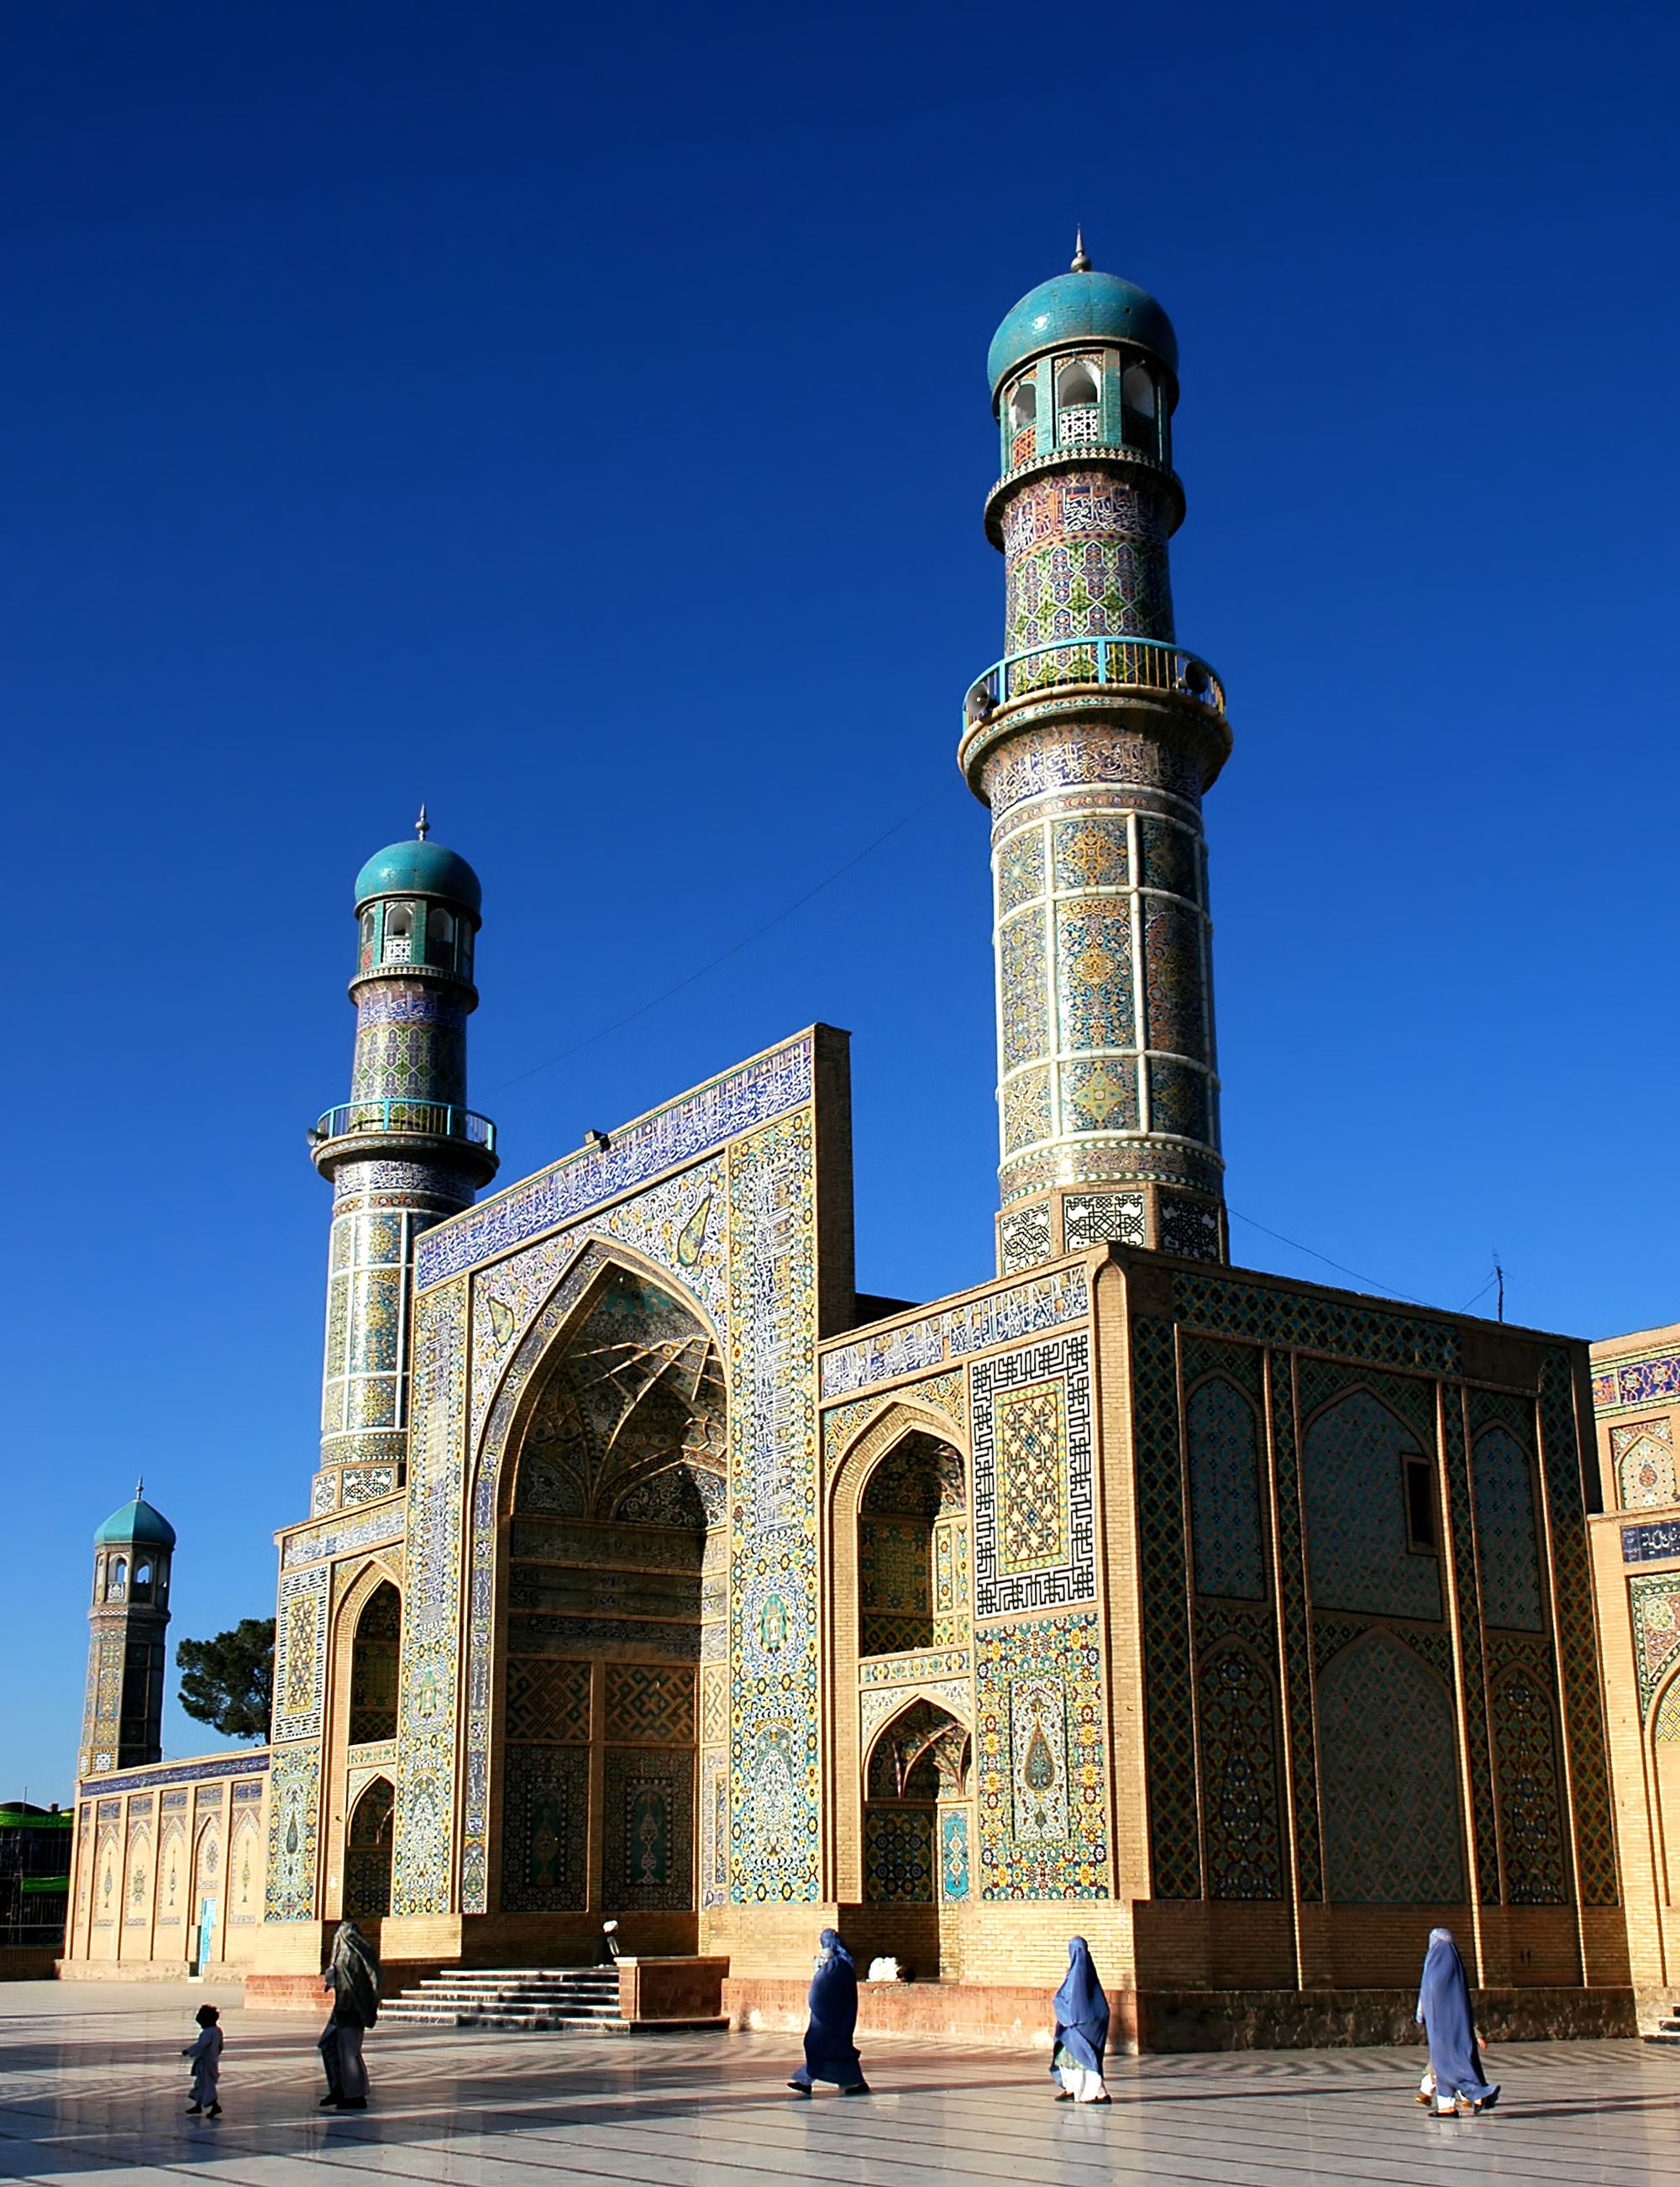 The Great Mosque of Herat